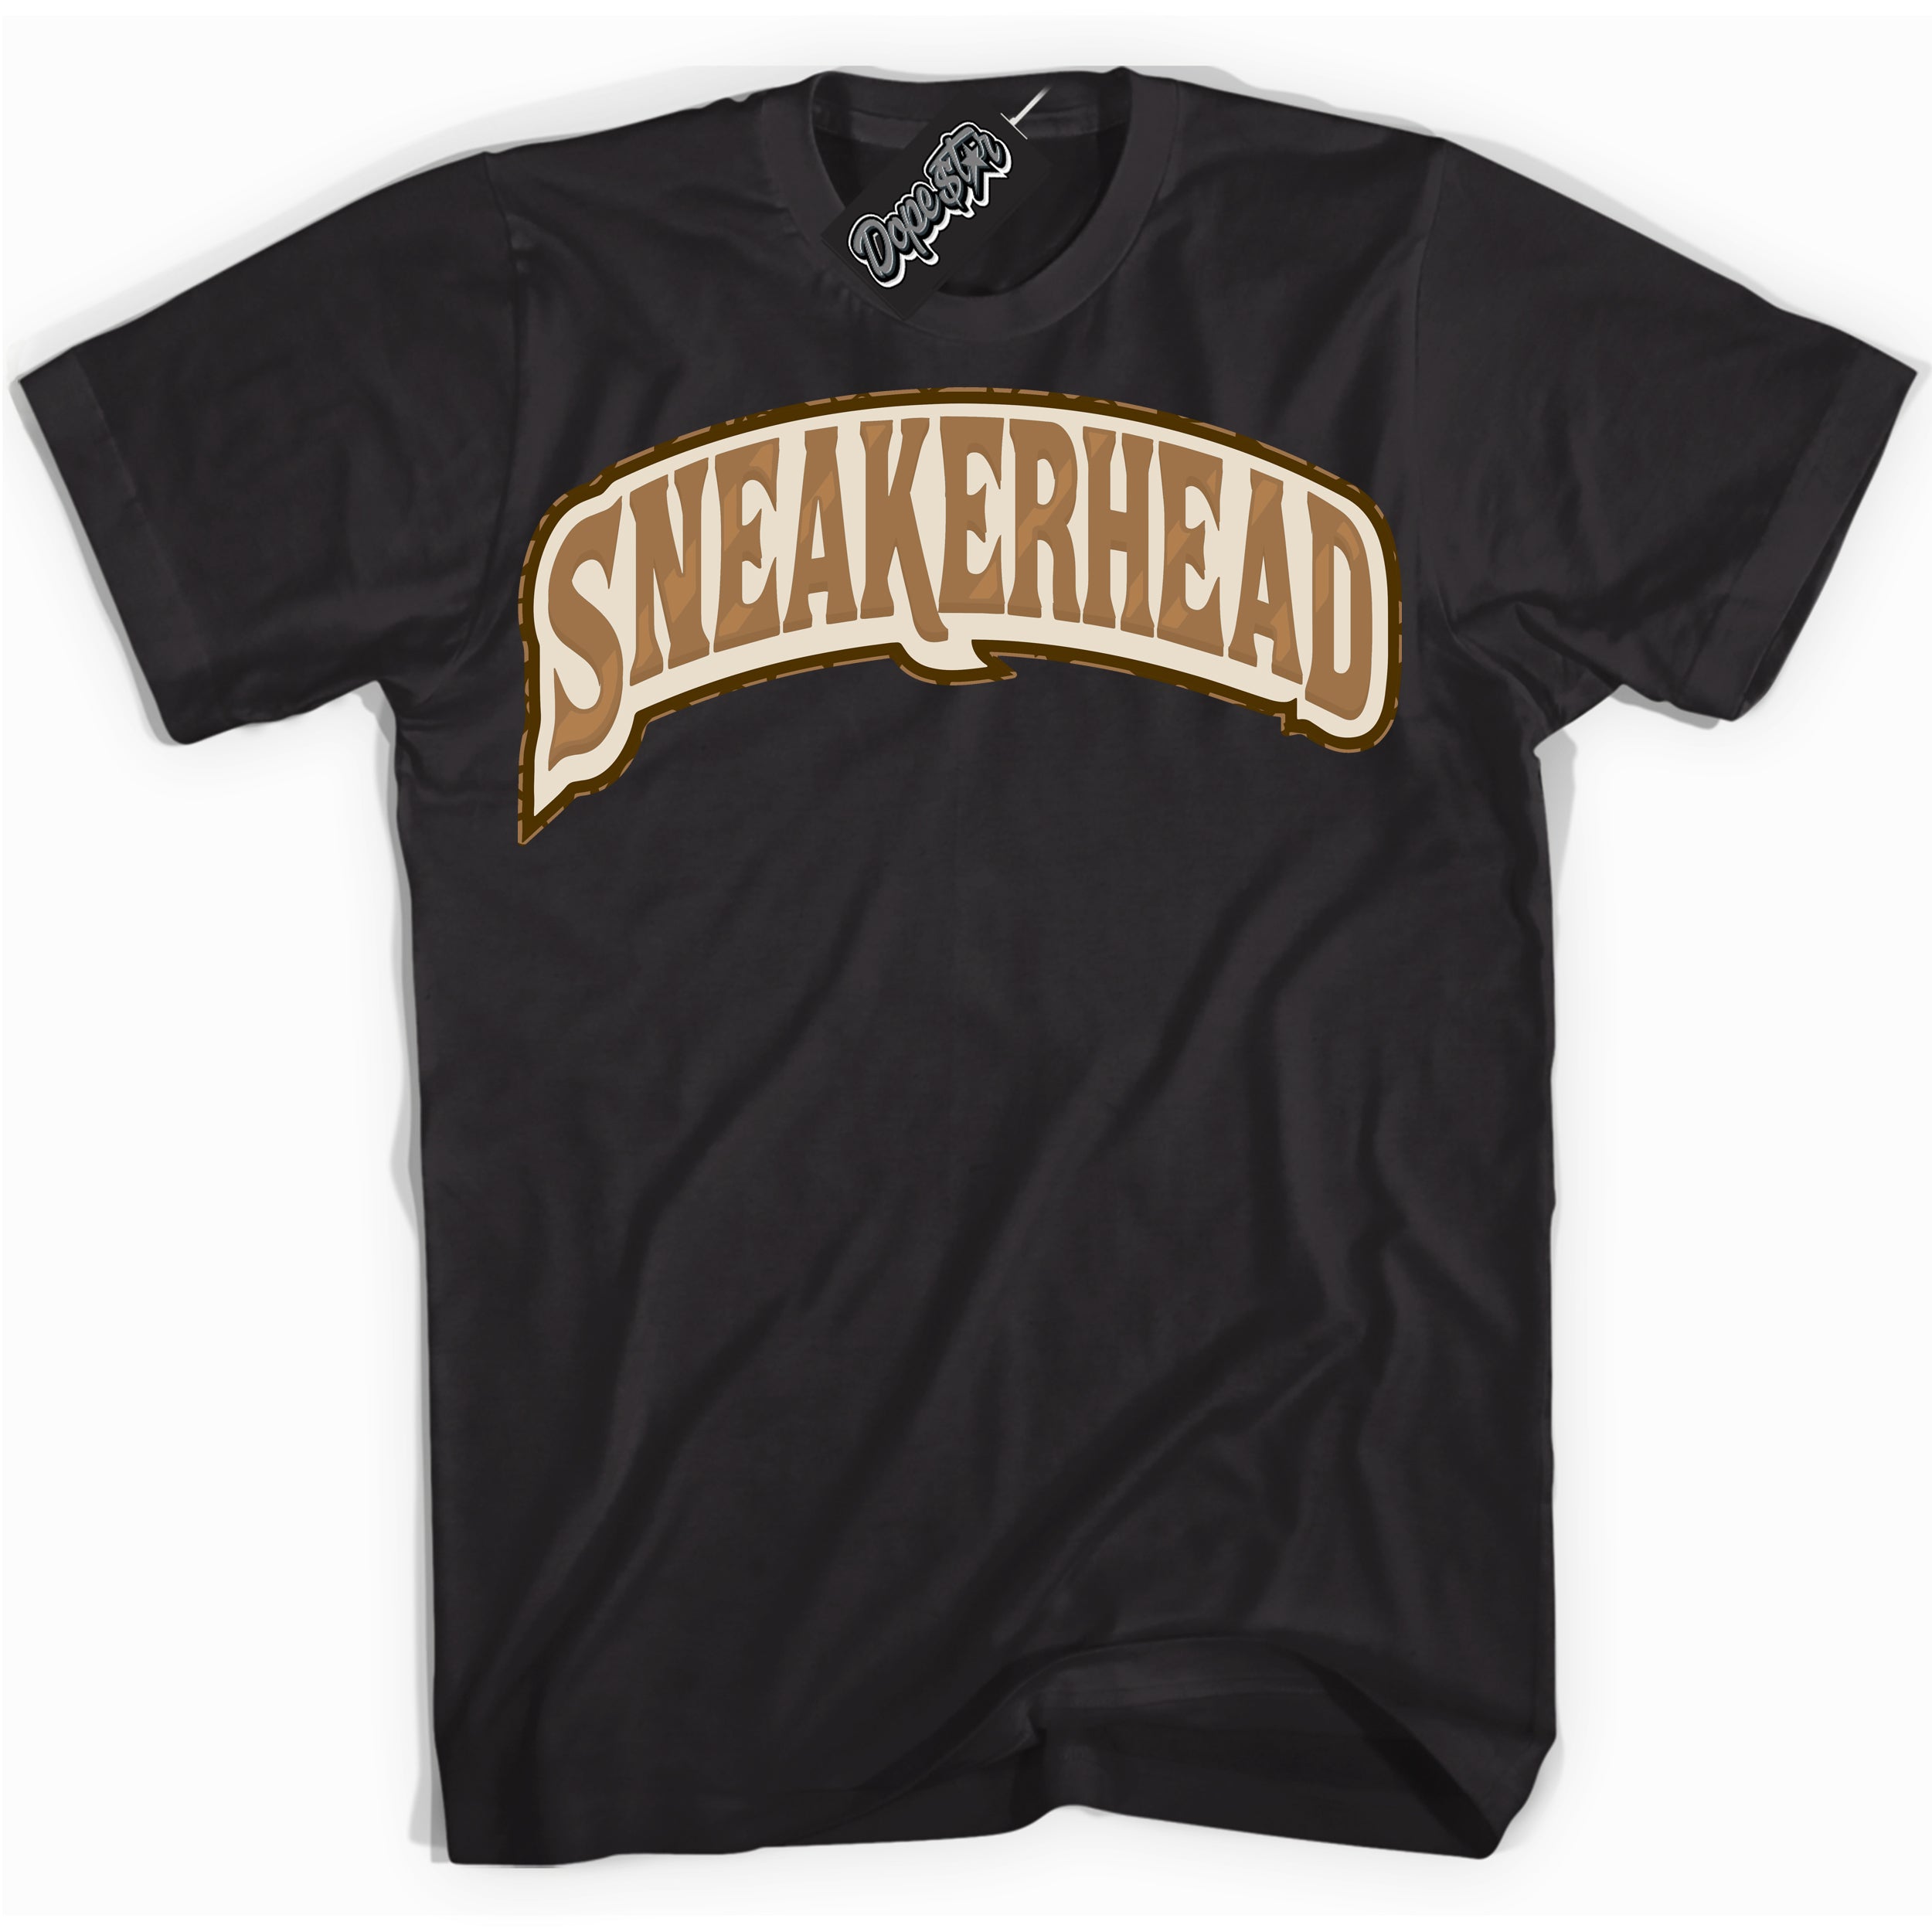 Cool Black graphic tee with “ Sneakerhead ” design, that perfectly matches Palomino 3s sneakers 